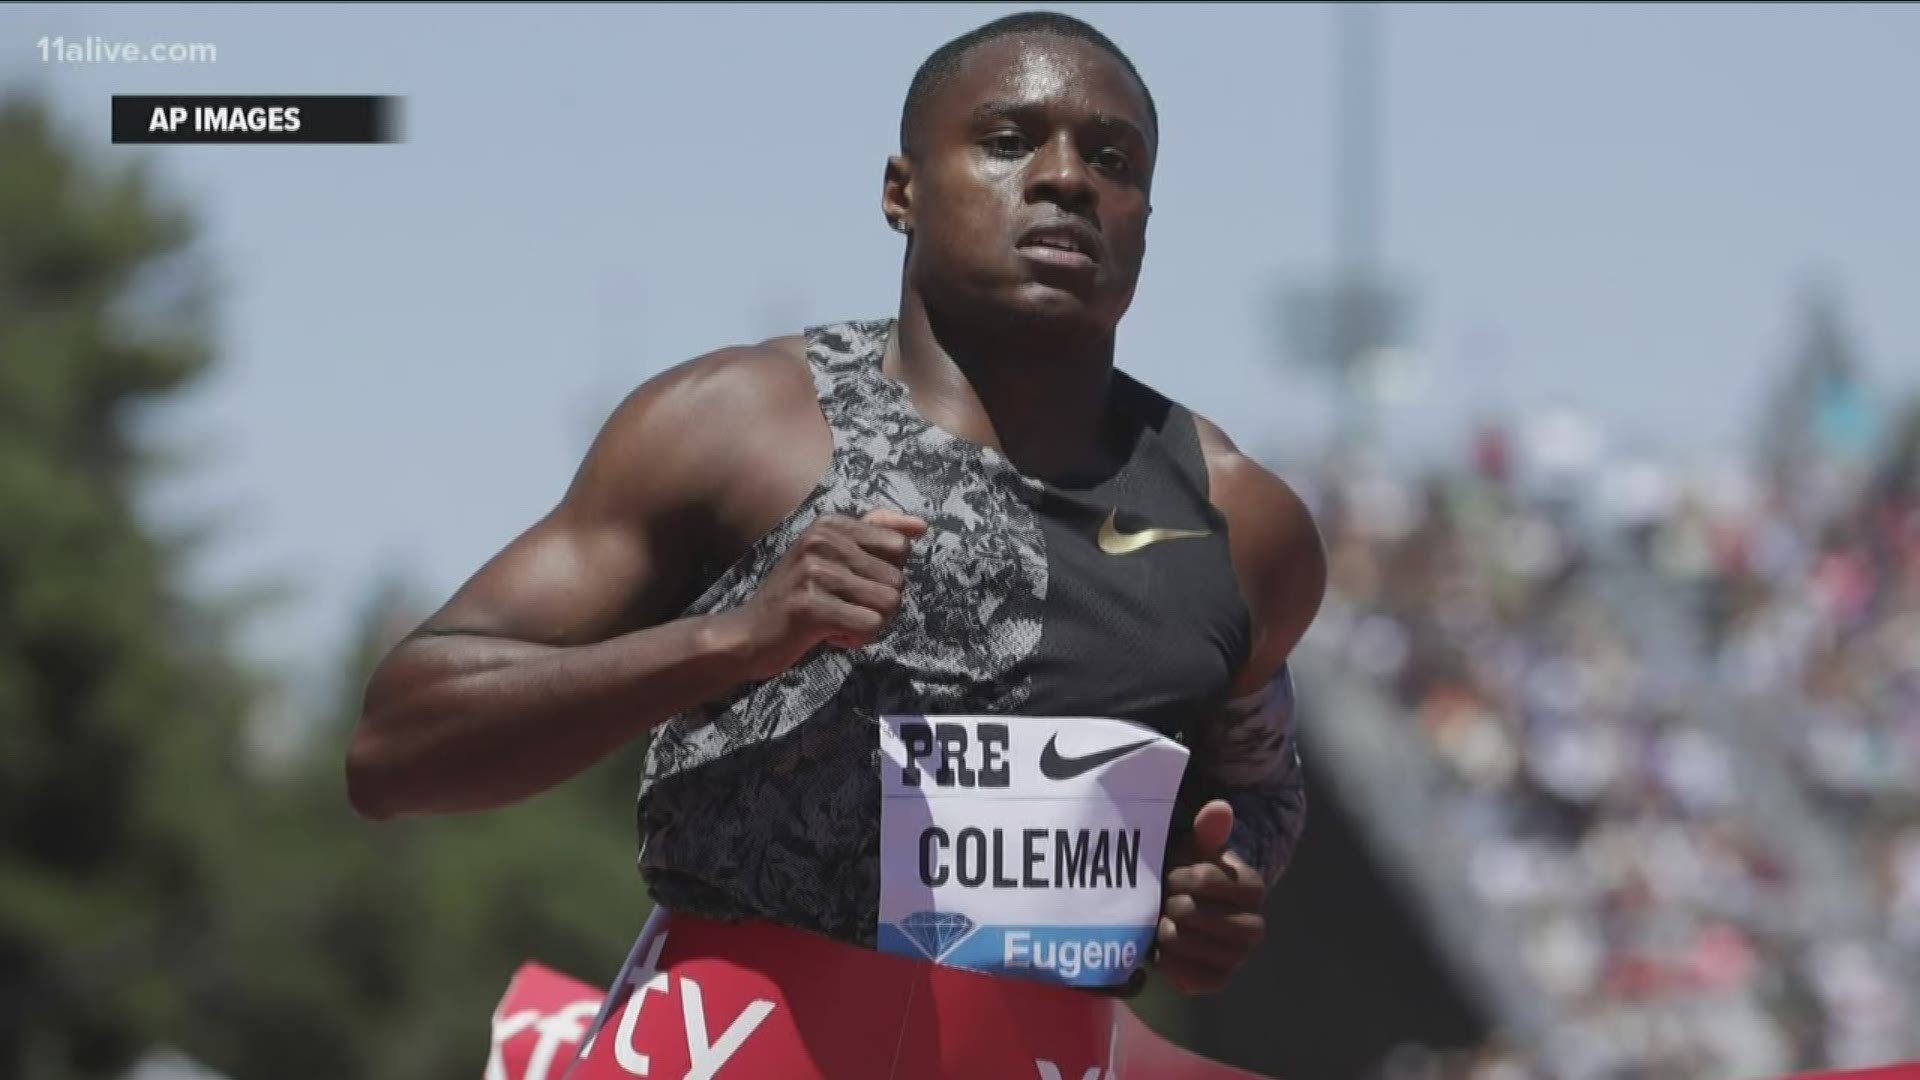 Coleman is the reigning U.S. champion and a favorite in the 100 meters, a distance at which he holds the world-leading time over the past three years.